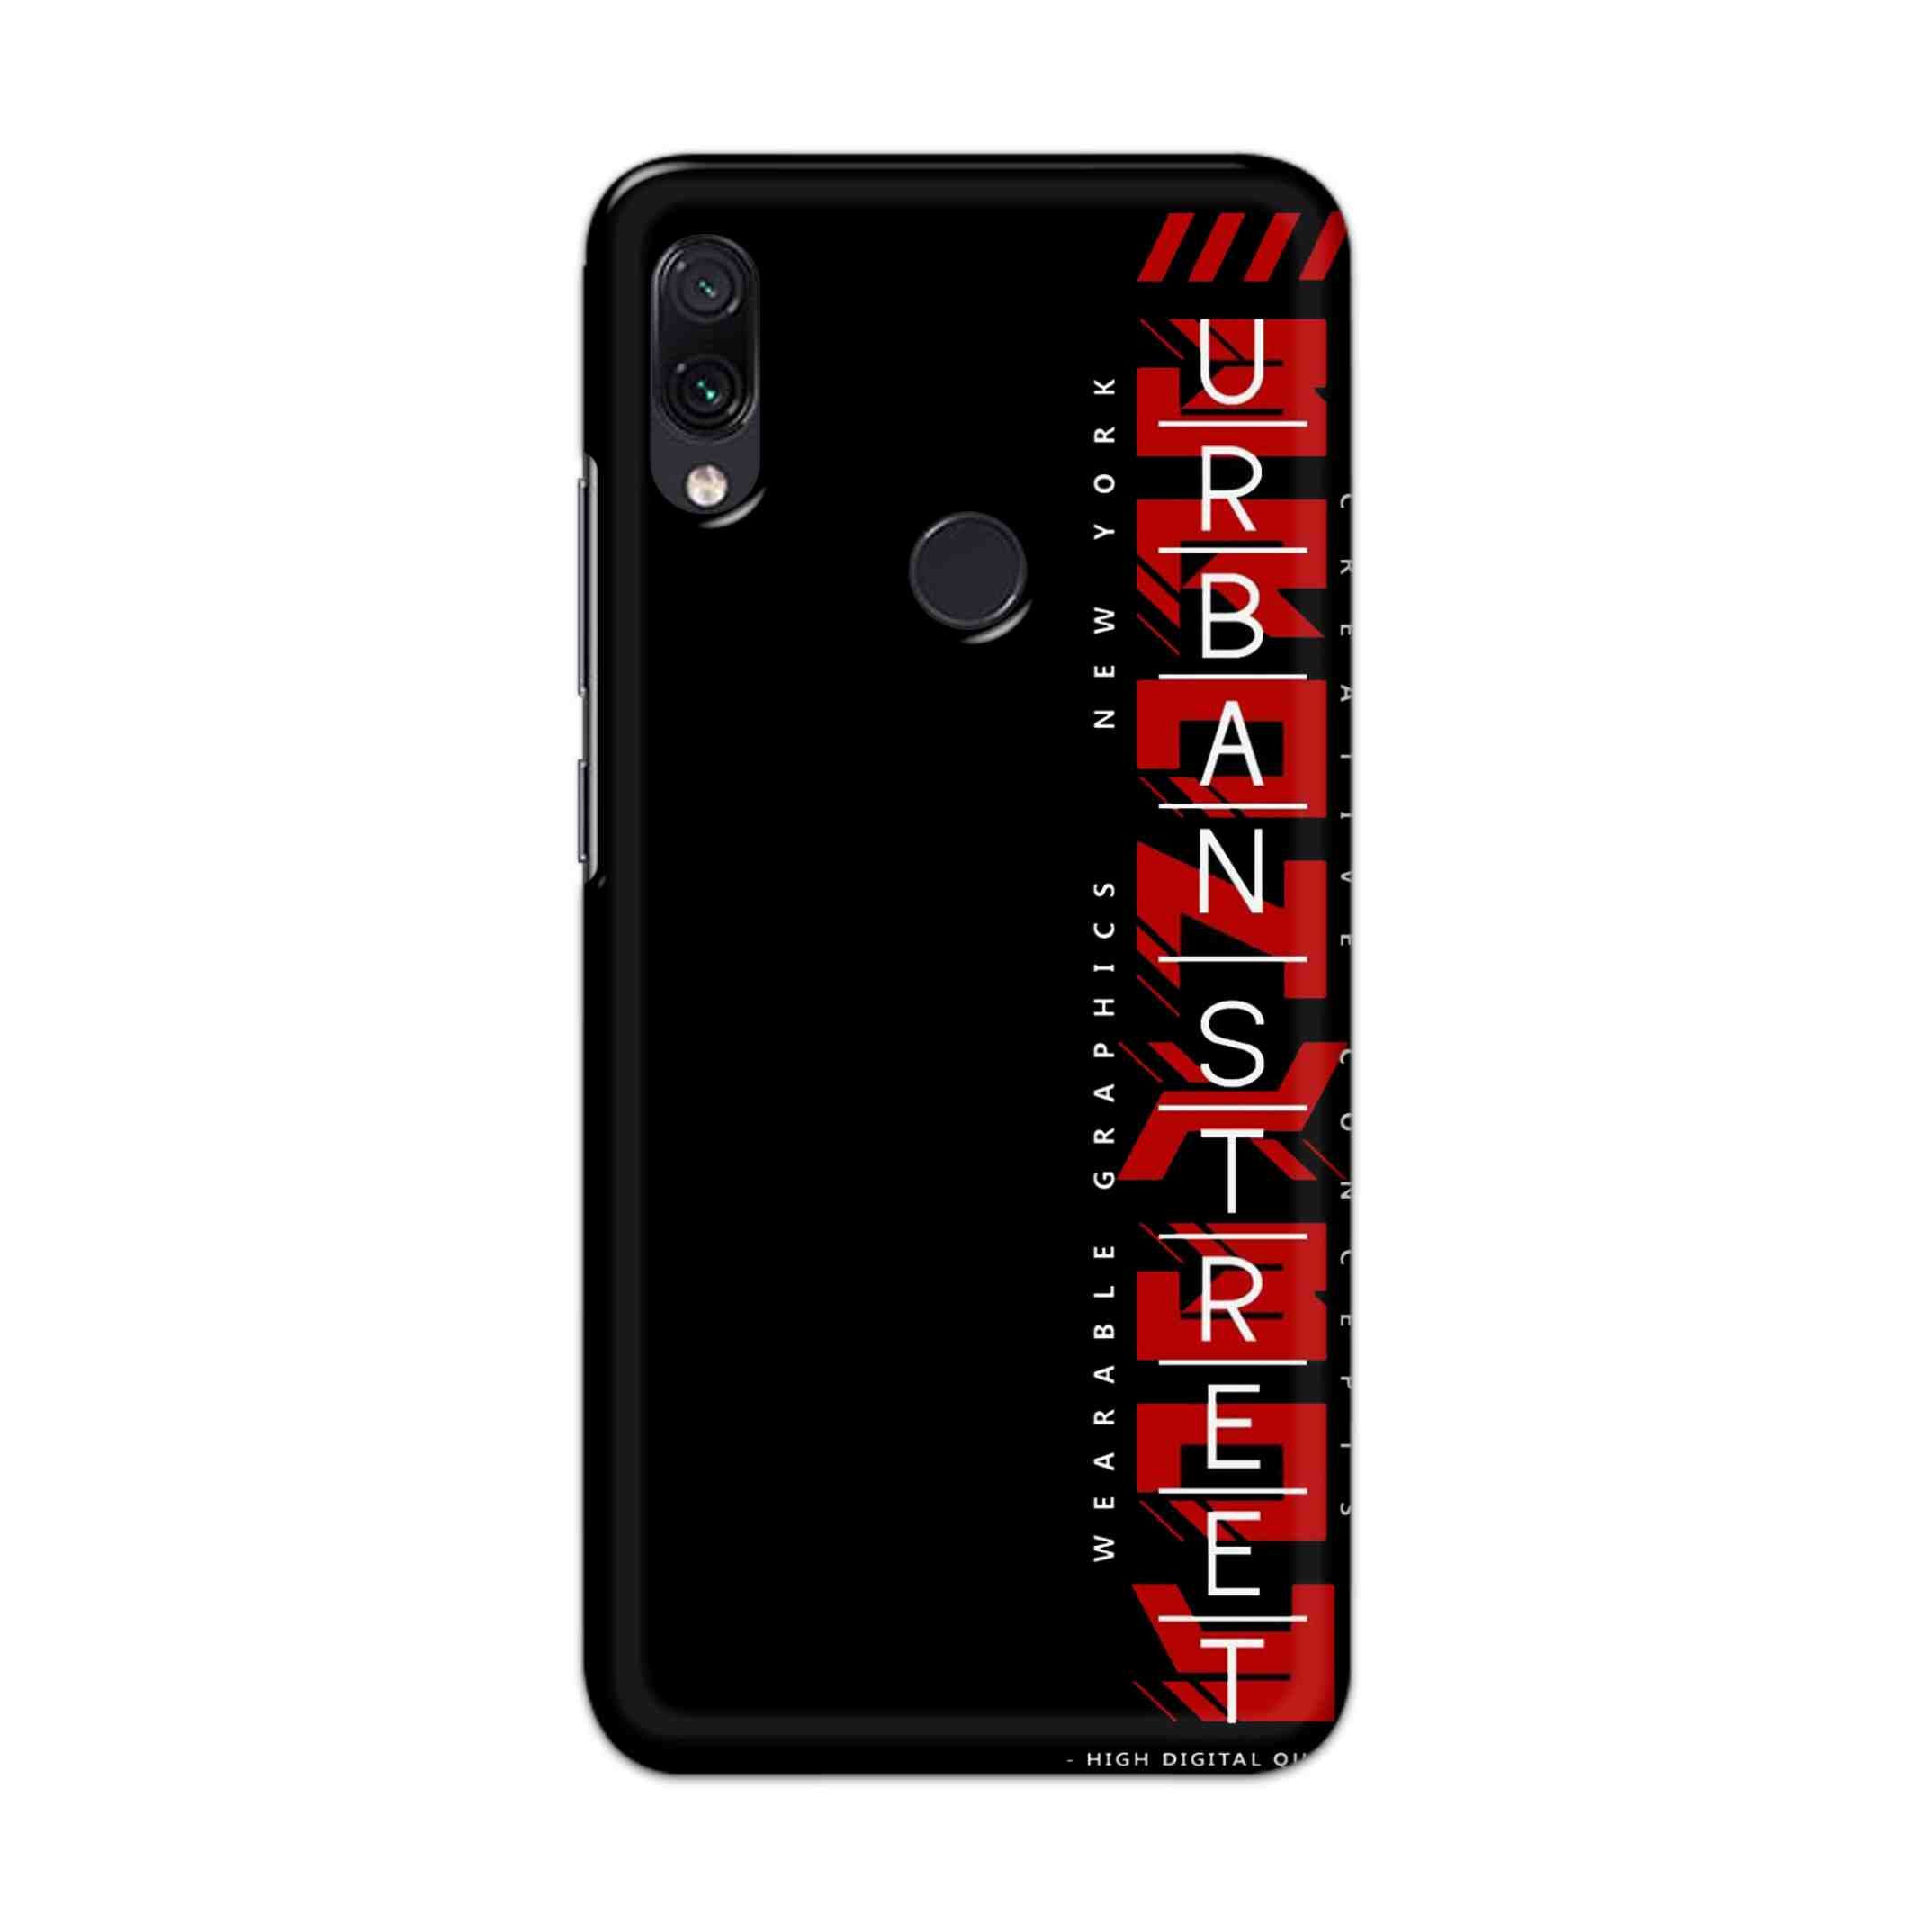 Buy Urban Street Hard Back Mobile Phone Case Cover For Redmi Note 7 / Note 7 Pro Online